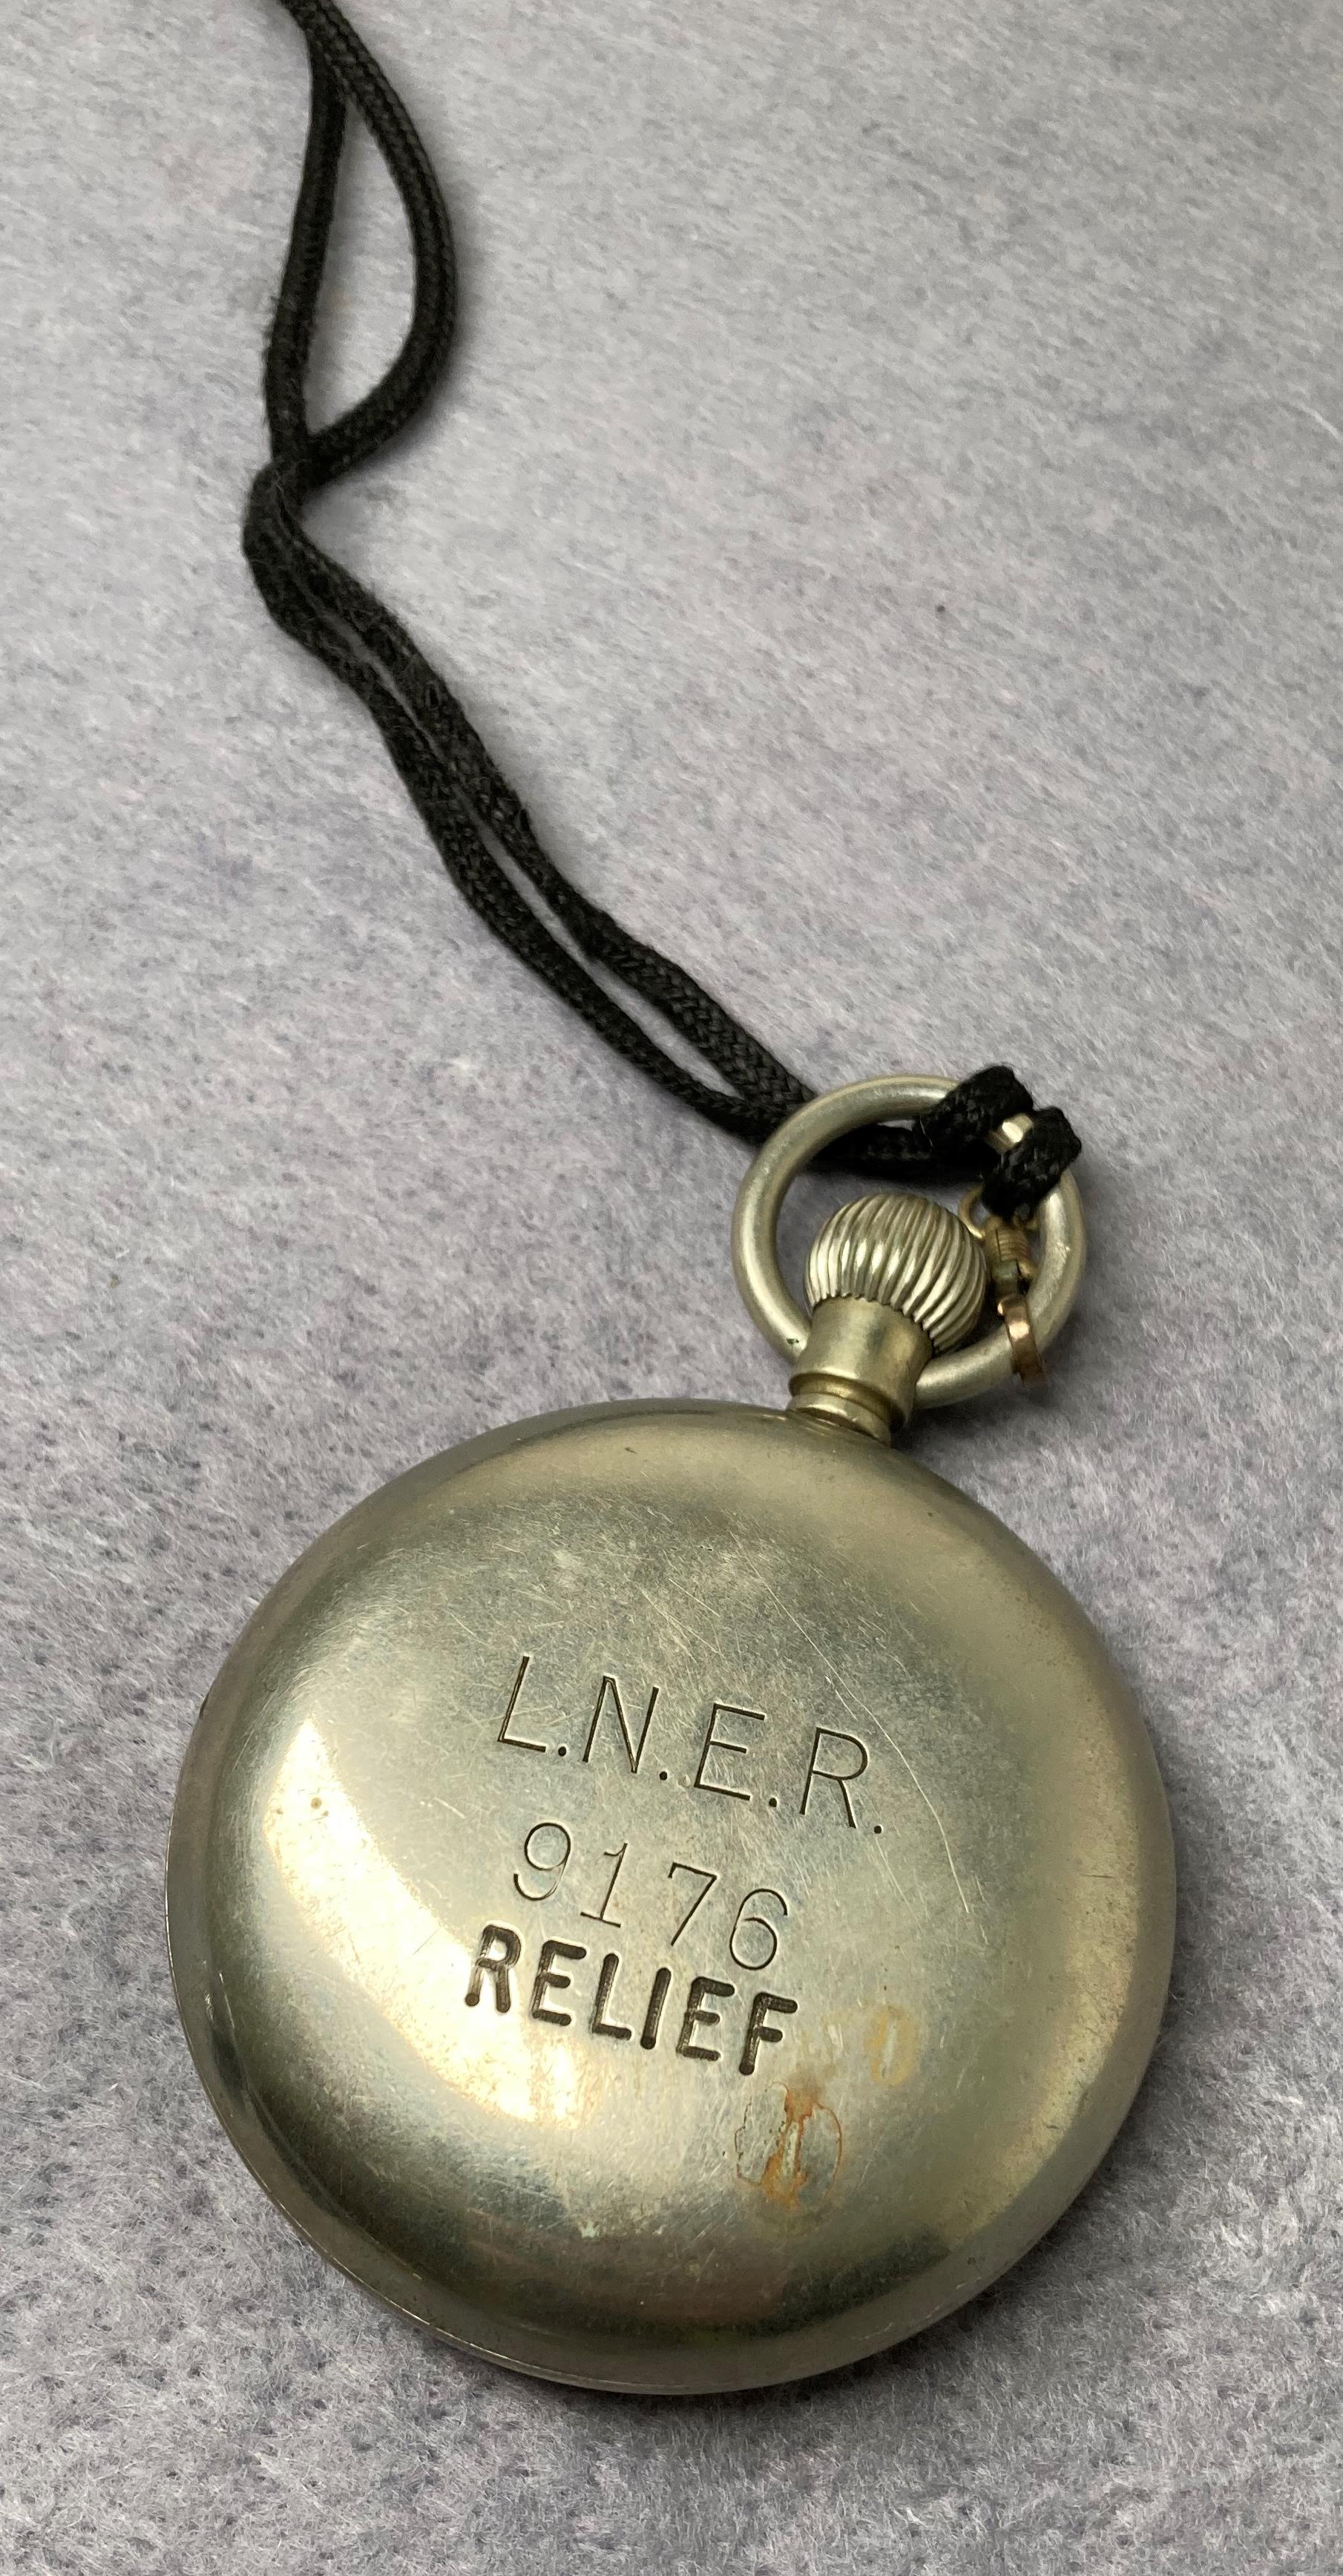 Selex pocket watch (working) with "LNER 9176 Relief" engraved to back, railway badges, cap badge, - Image 5 of 5